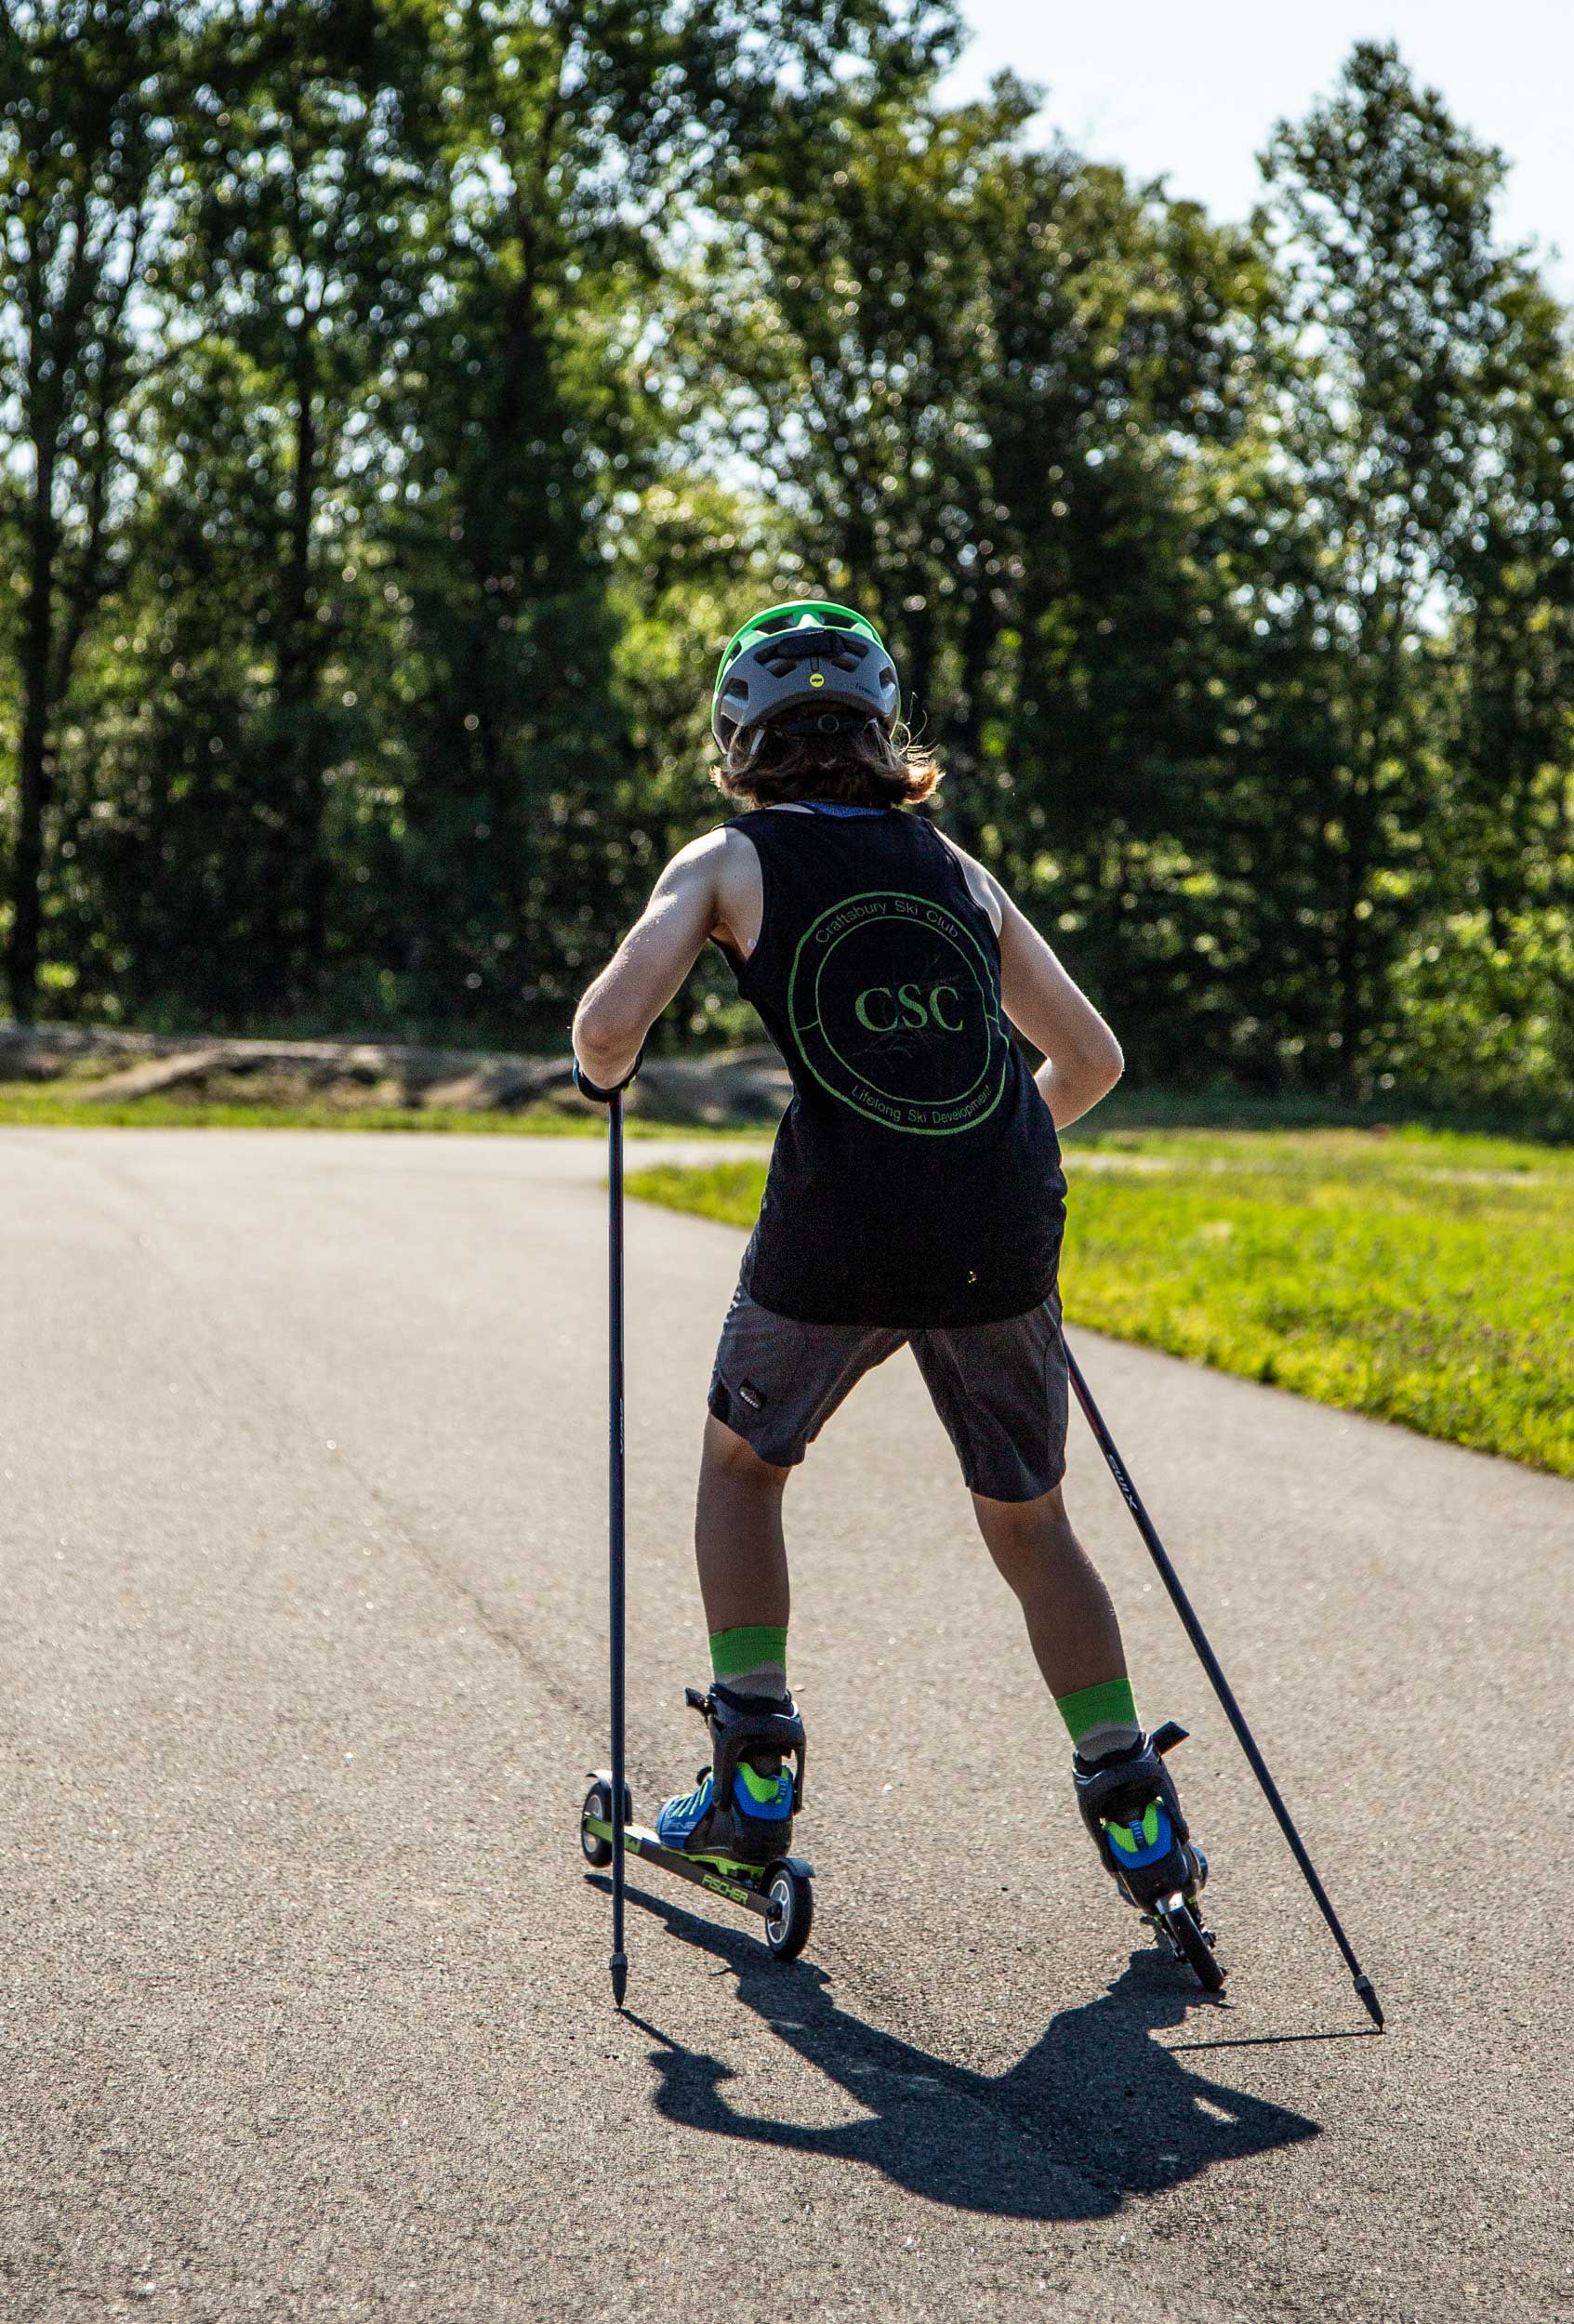 So You Want to Learn to Rollerski?